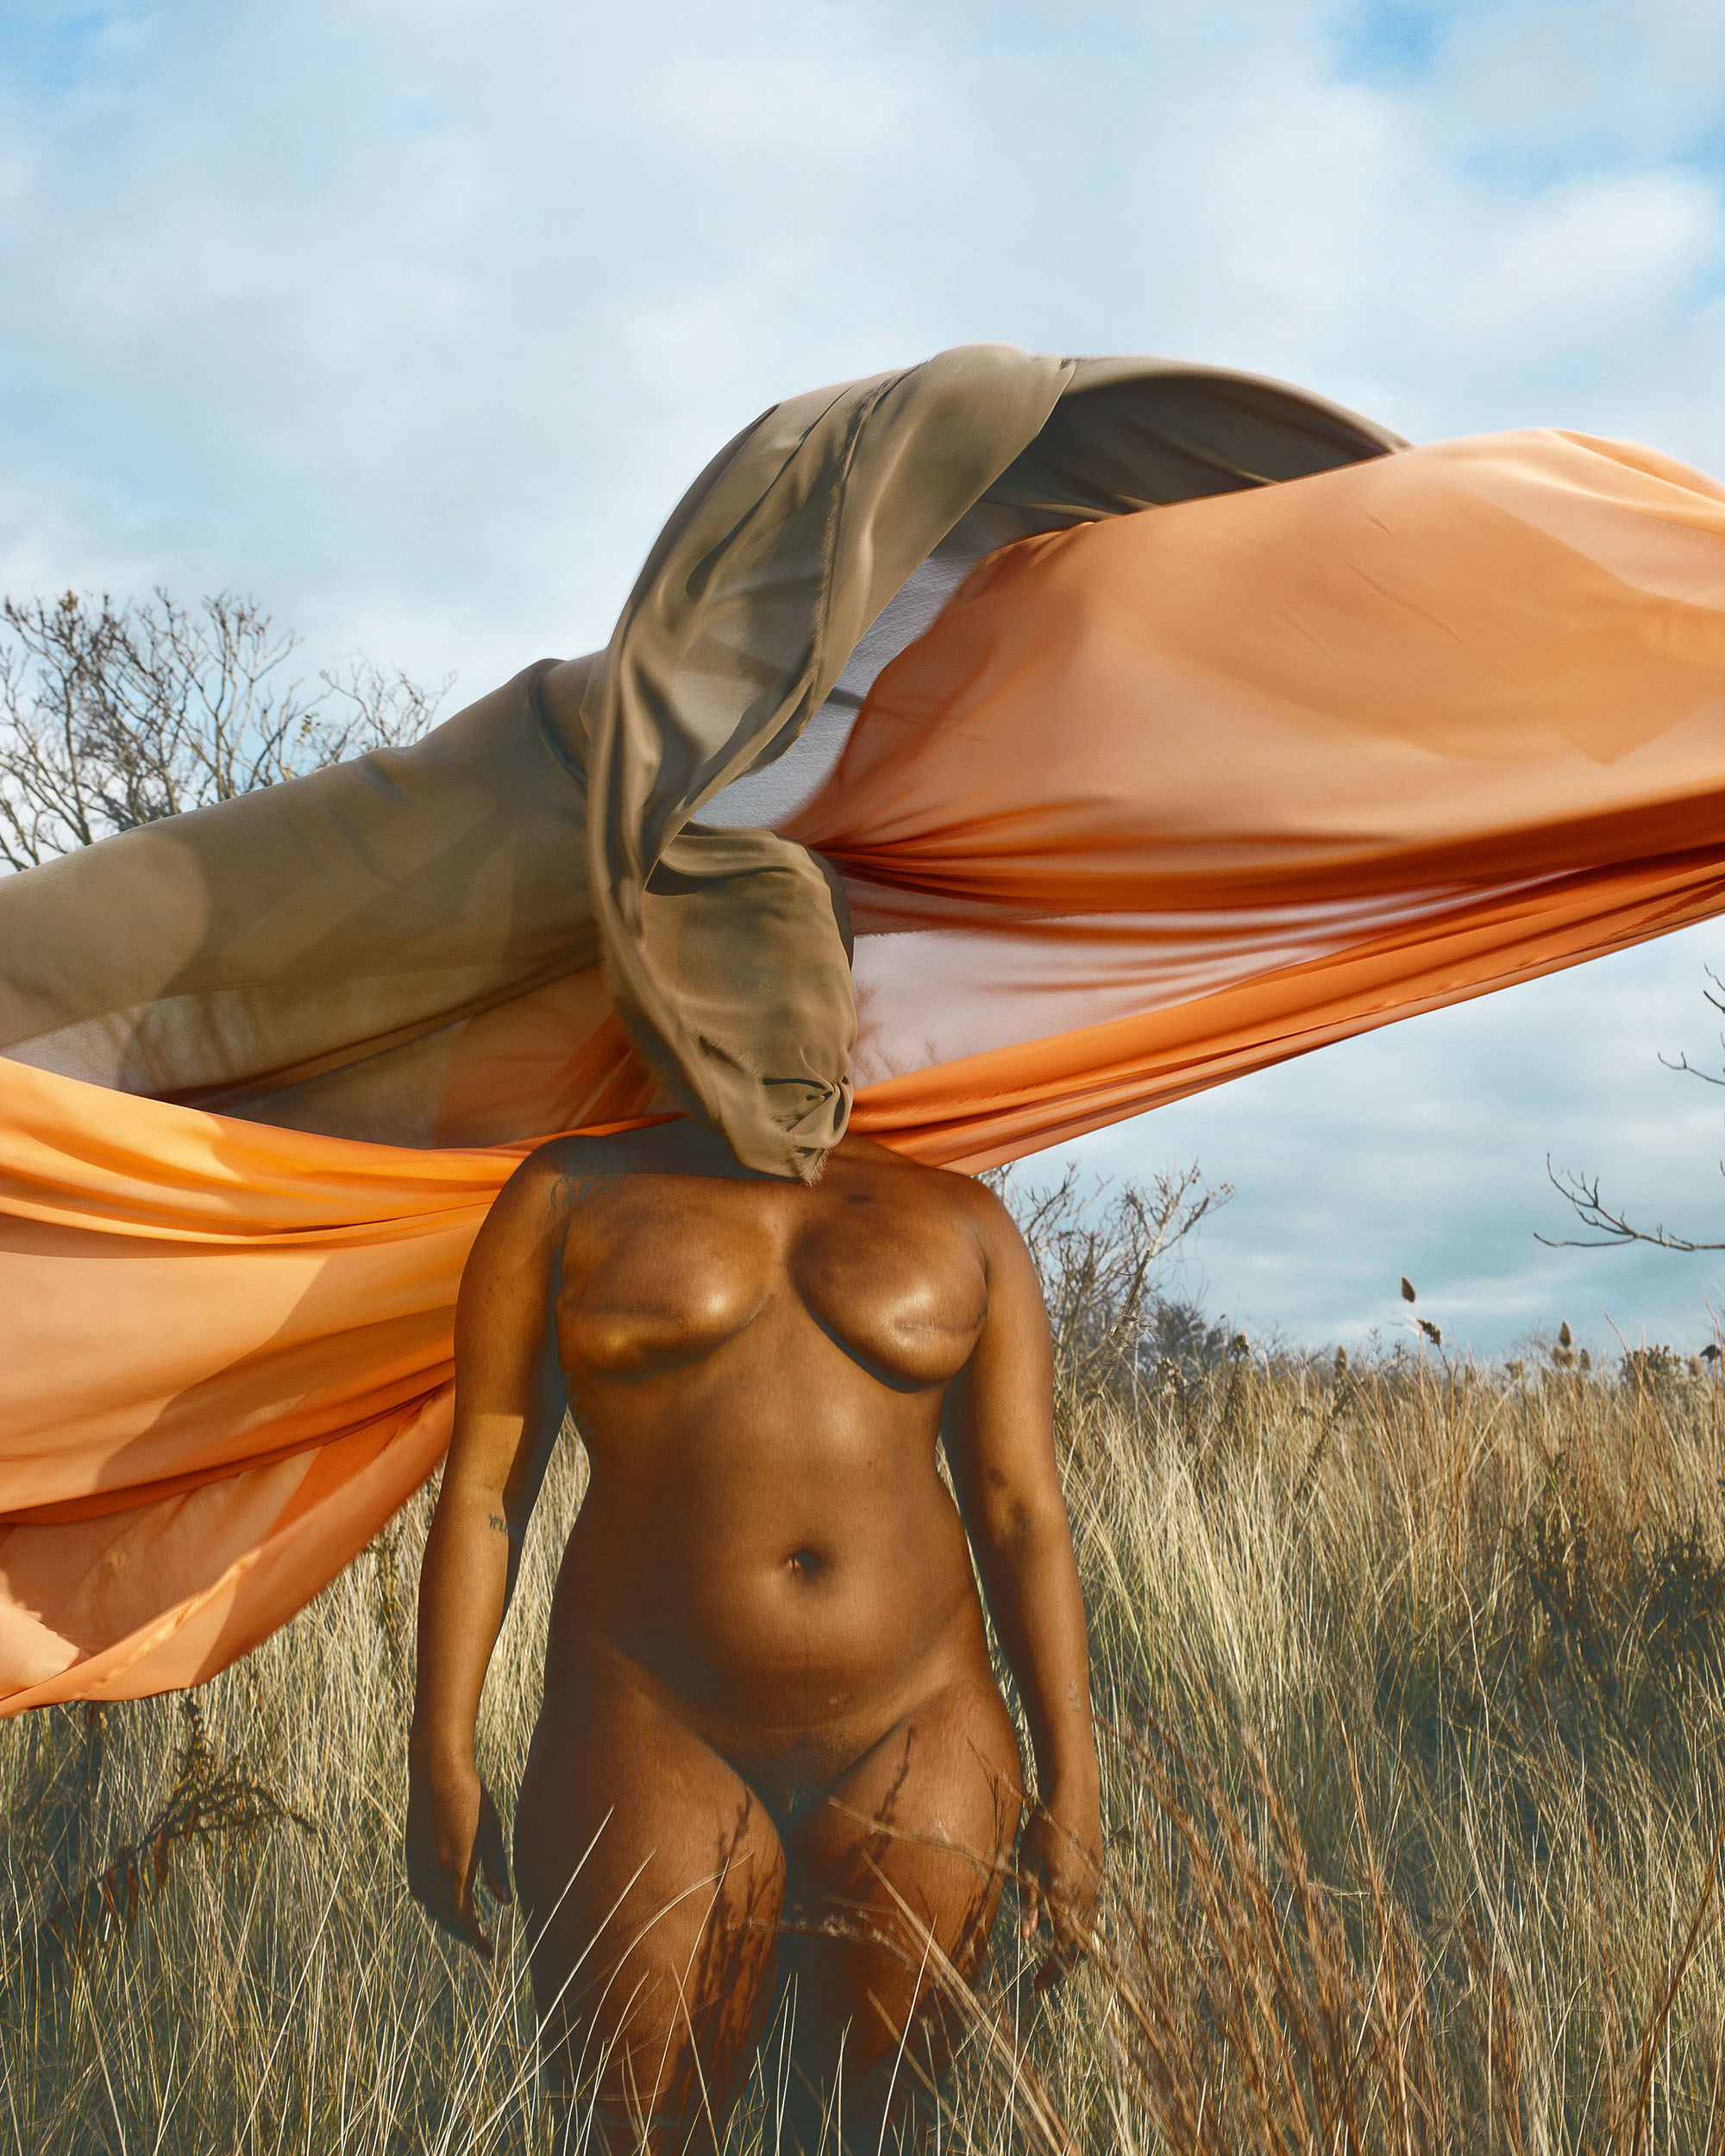 A women stands naked in a grass field with fabric covering her head